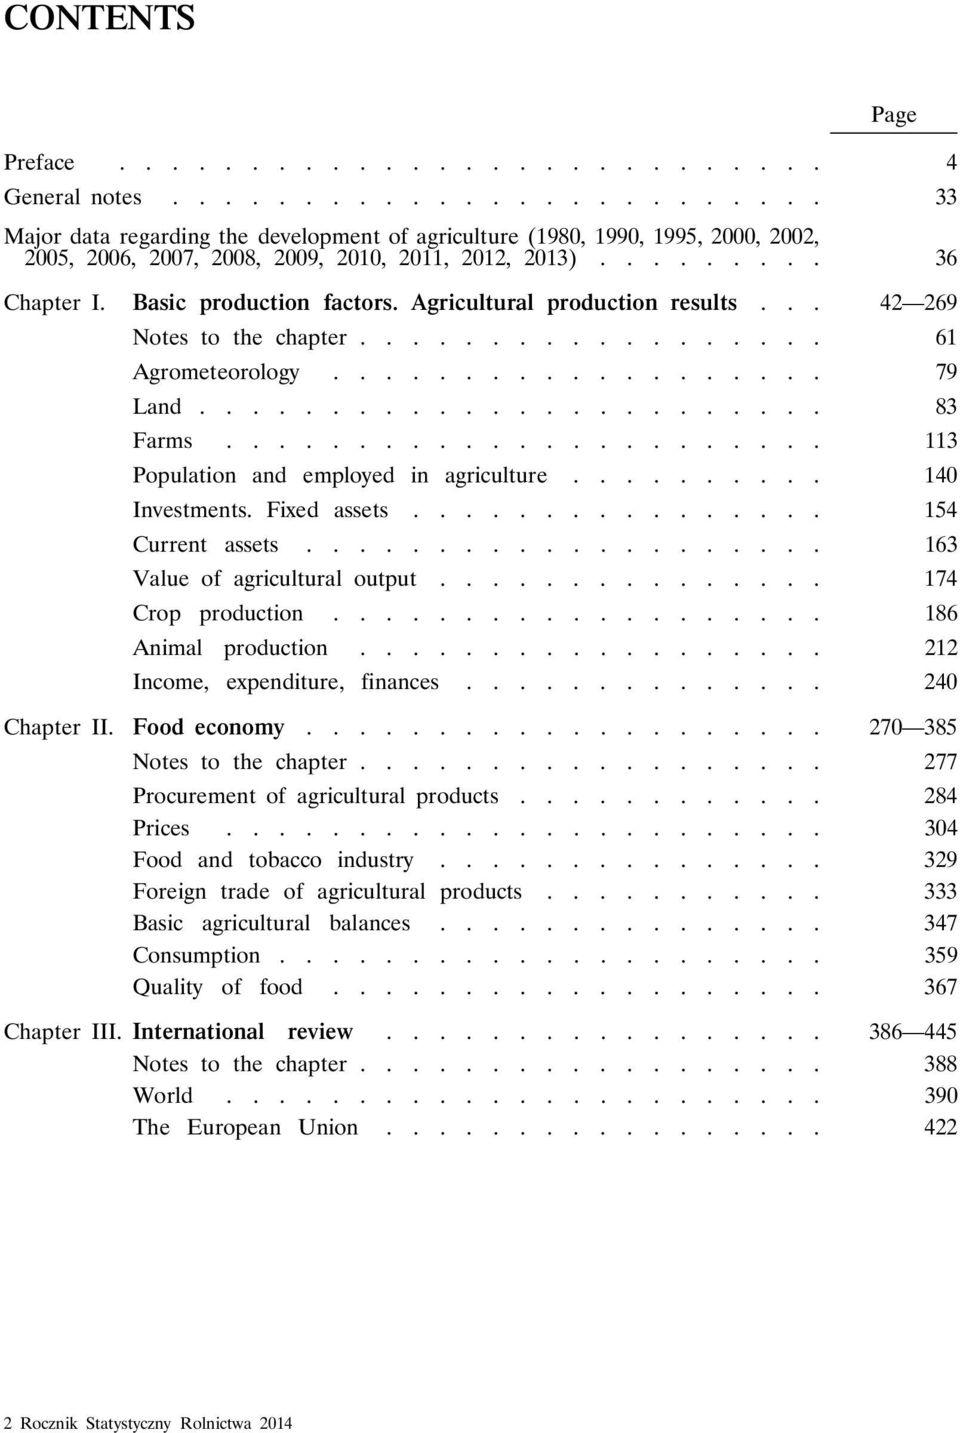 II Basic production factors. Agricultural production results... 42 269 Page Notes to the chapter.................. 61 Agrometeorology................... 79 Land........................ 83 Farms.